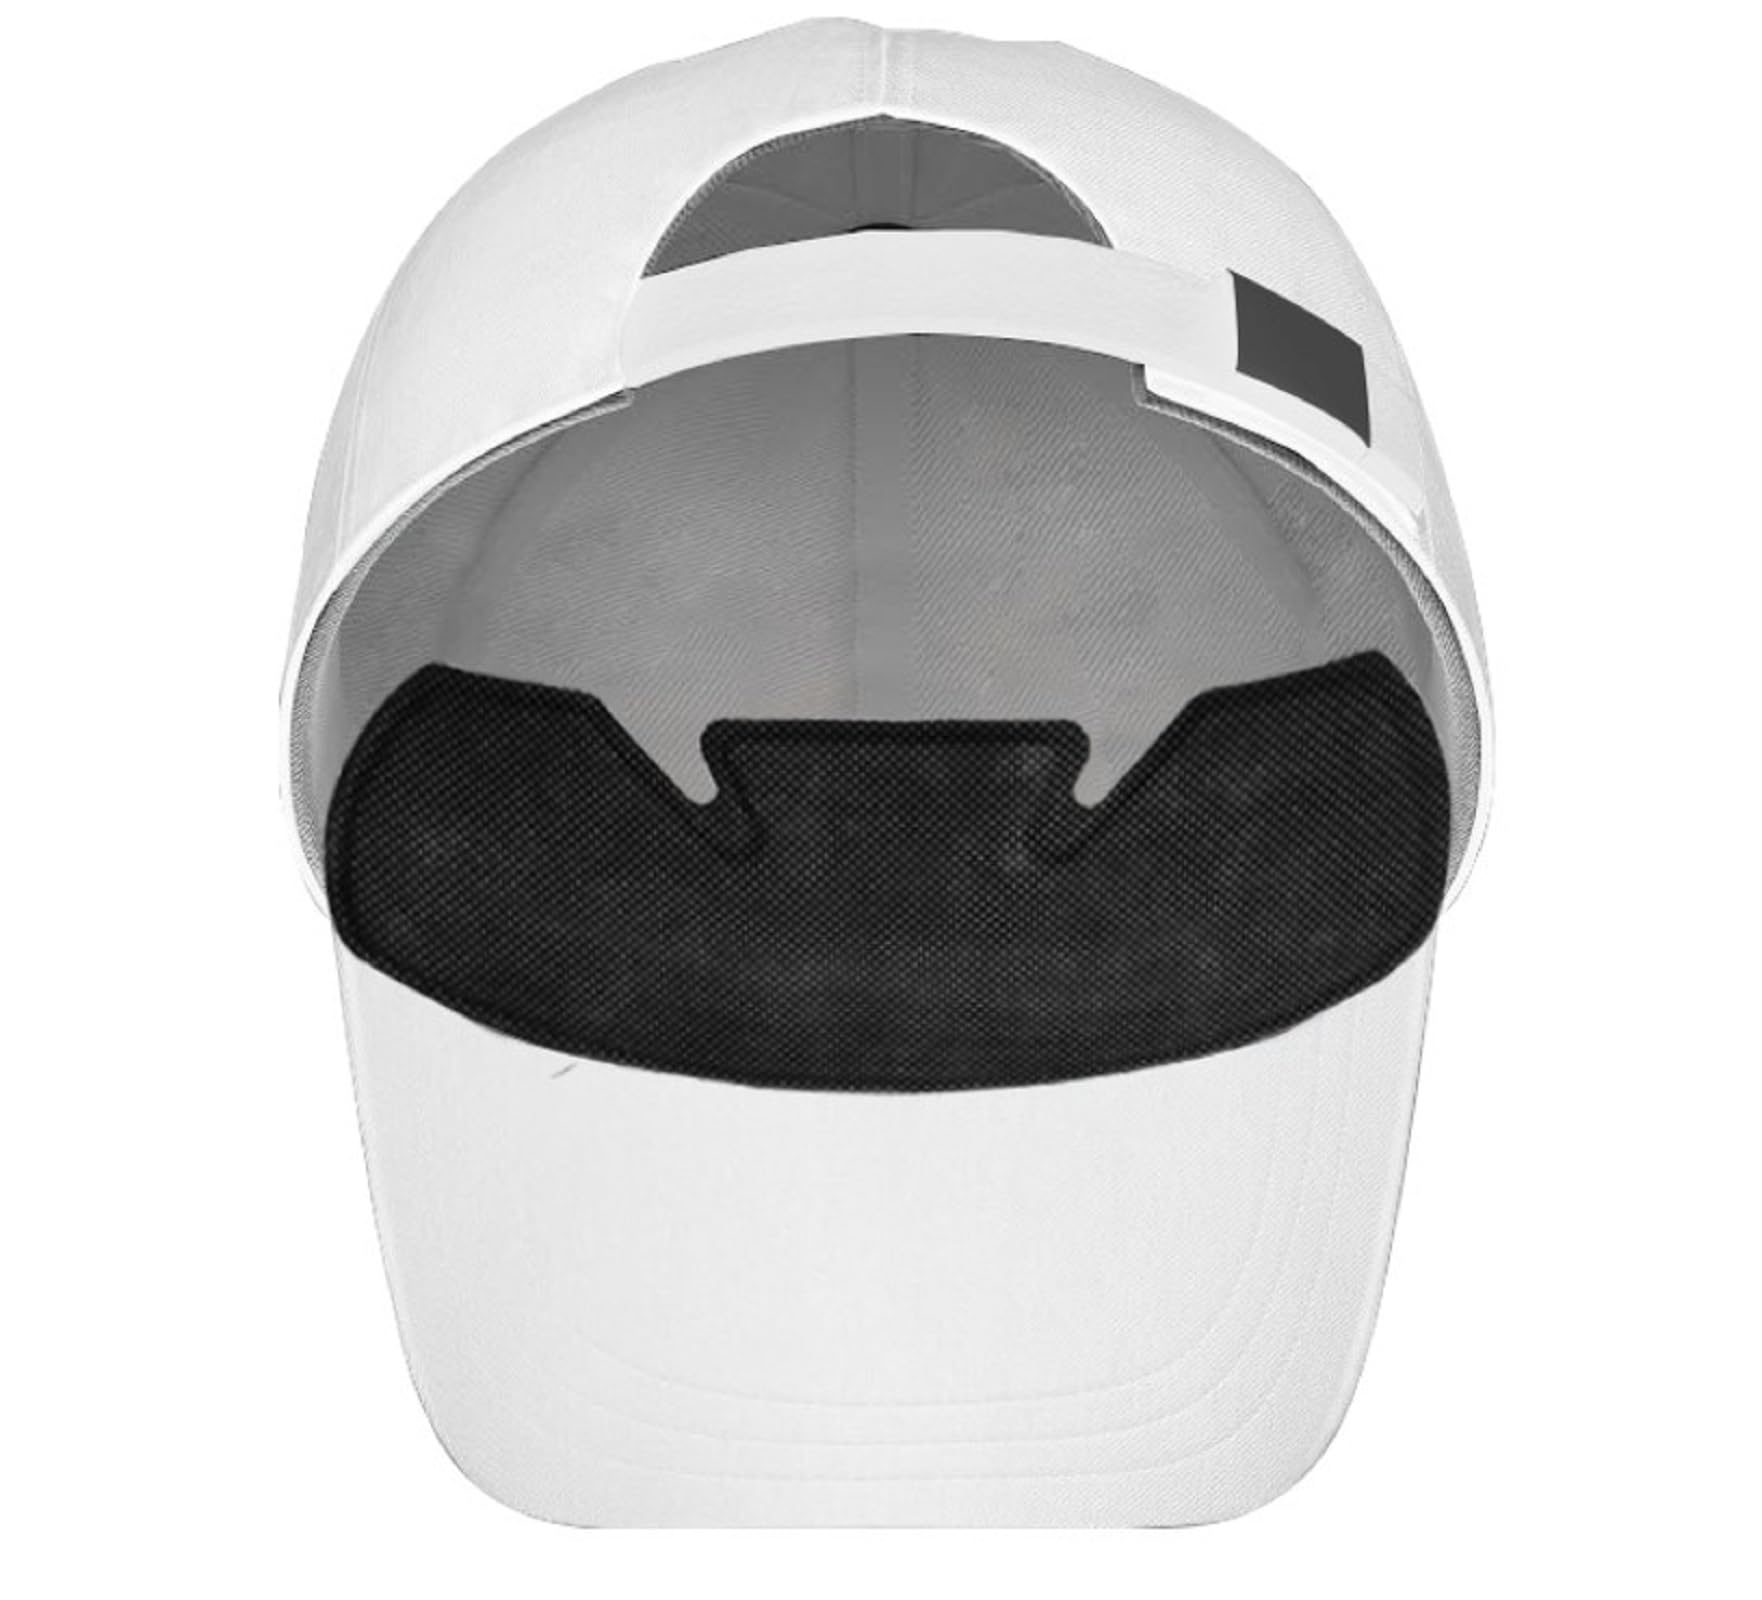 NoSweat Golf Hat Sweat Liner – Prevents Stains & Odor Patented Technology Made in The USA